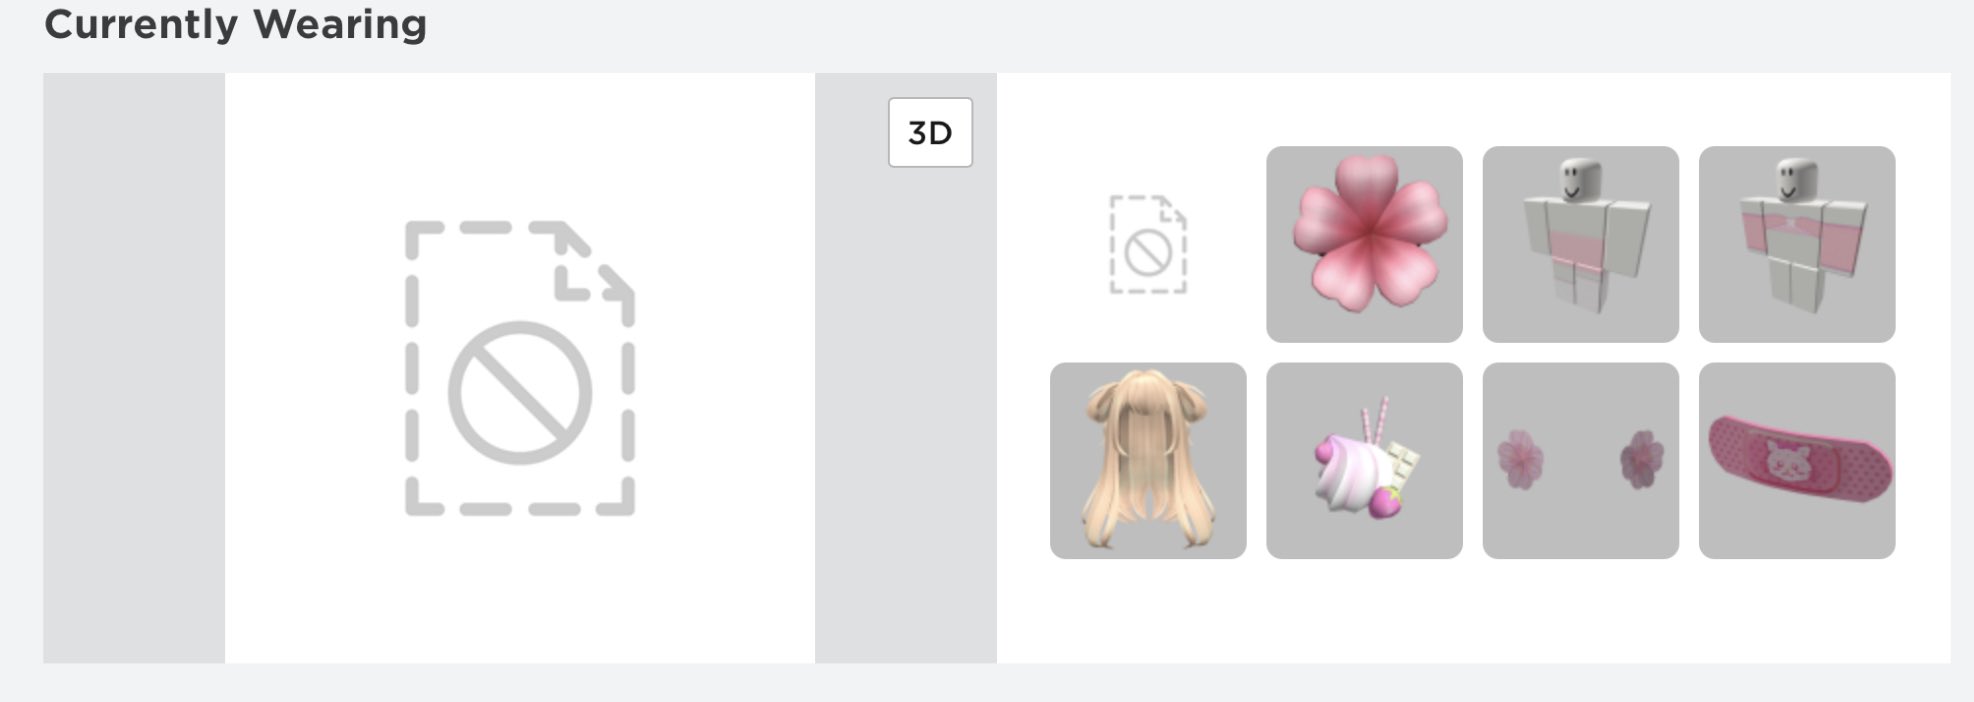 On Twitter Really Roblox You Delete A Perfectly Fine Accessory Because People Wanted To Twist It Into Something Disgusting I M So Sick Of Moderation Rip My Cute Kawaii Outfit Https T Co X9bli9sein - how to delete roblox outfits on ipad 2021